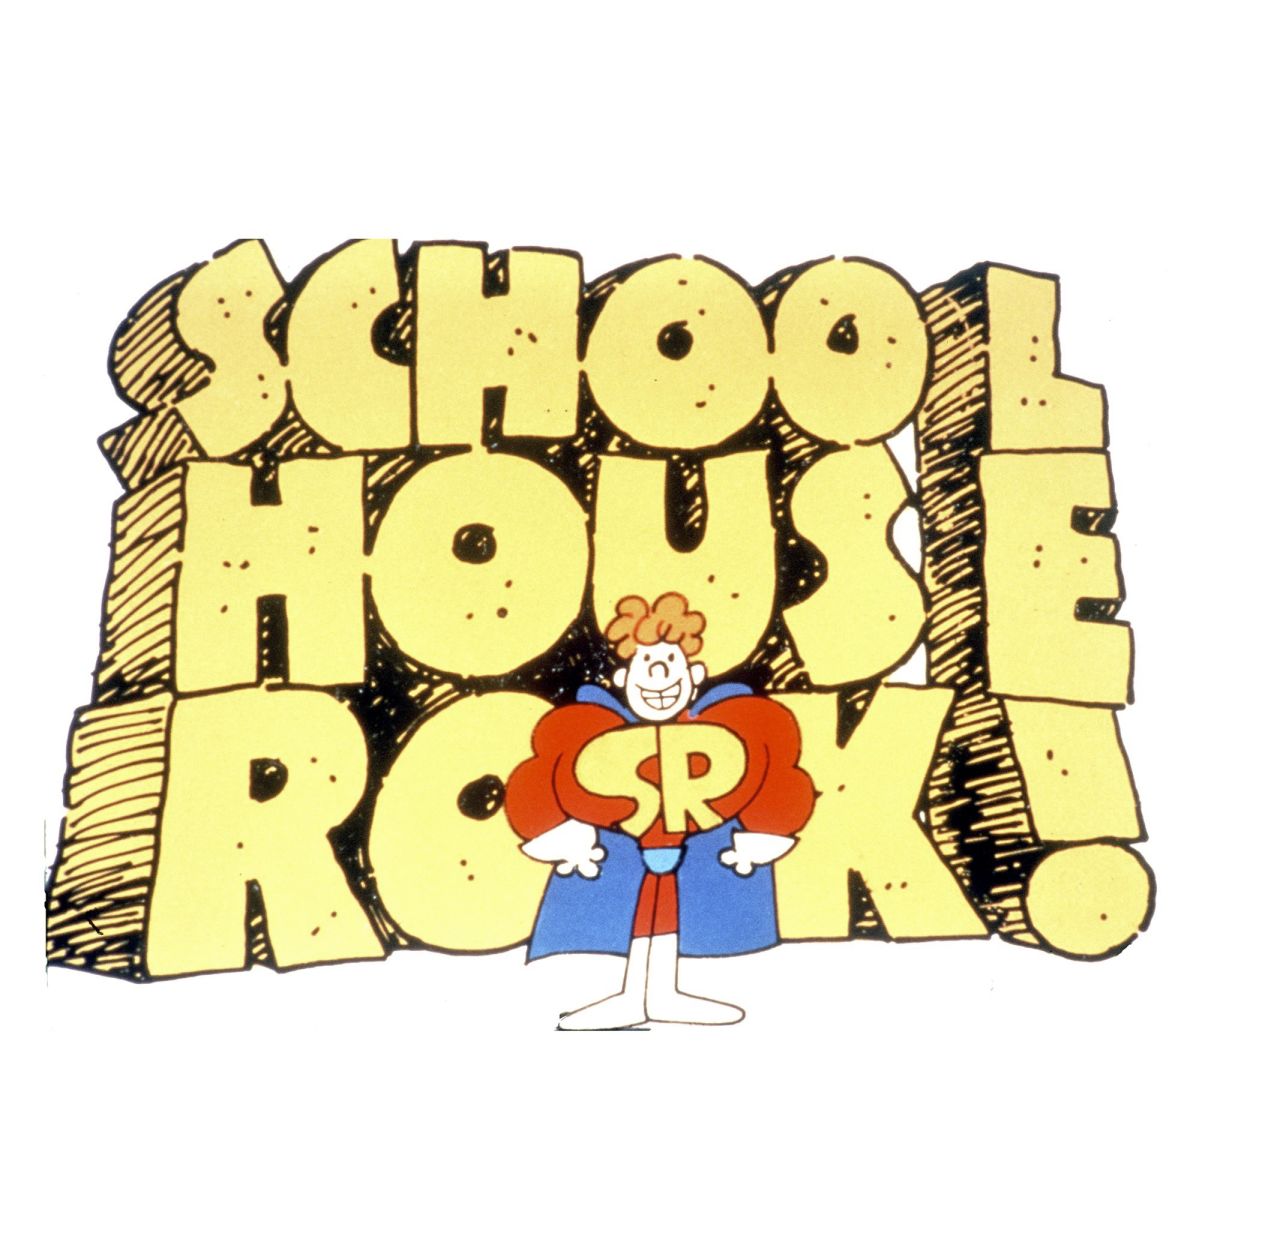 On Saturday mornings, the musical vignettes of "Schoolhouse Rock!" (1972-85) educated a generation of children about math, grammar, science and American history. Tom Yohe and George Newall were the original creative forces of the series, along with singer/songwriter Bob Dorough.